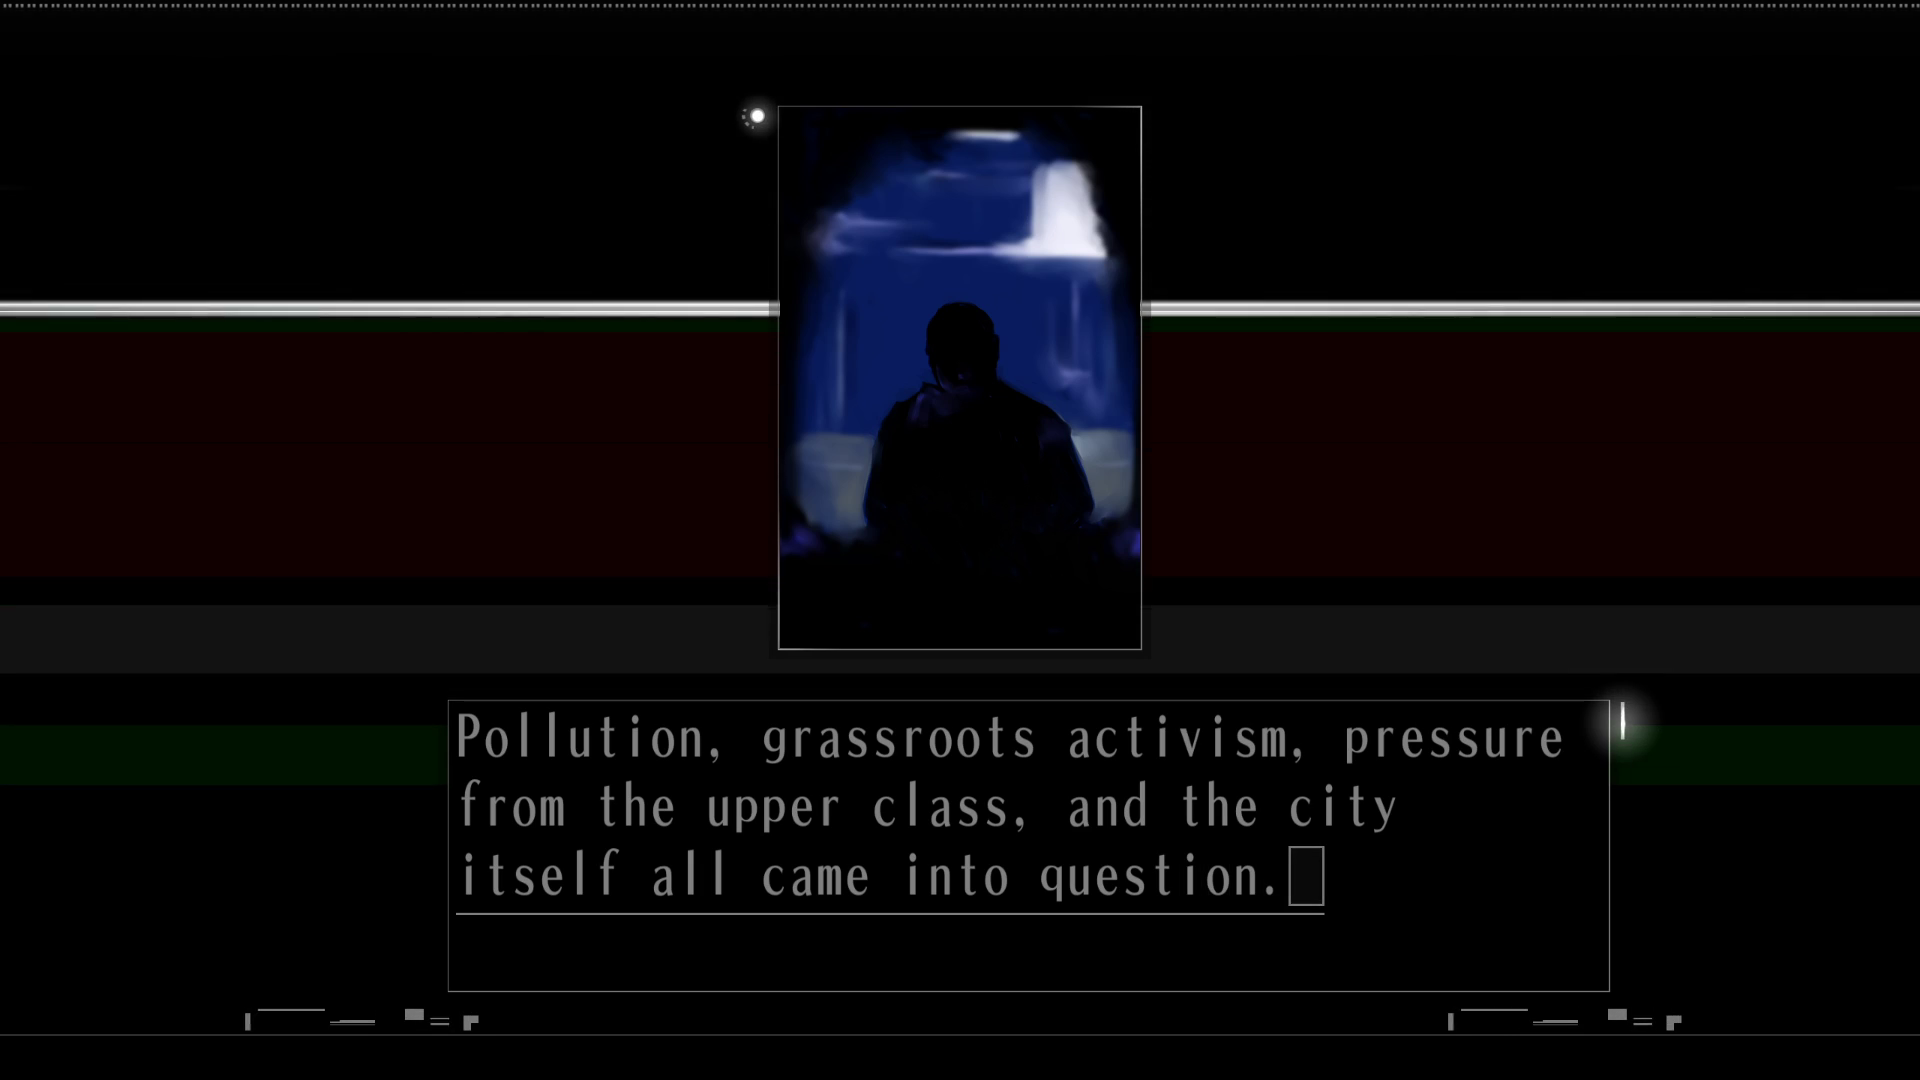 Screenshot from "HIKARI." In the narrow central window, a dark figure sits in the shadows. He says, "Pollution, grassroots activism, pressure from the upper class, and the city itself all came into question."